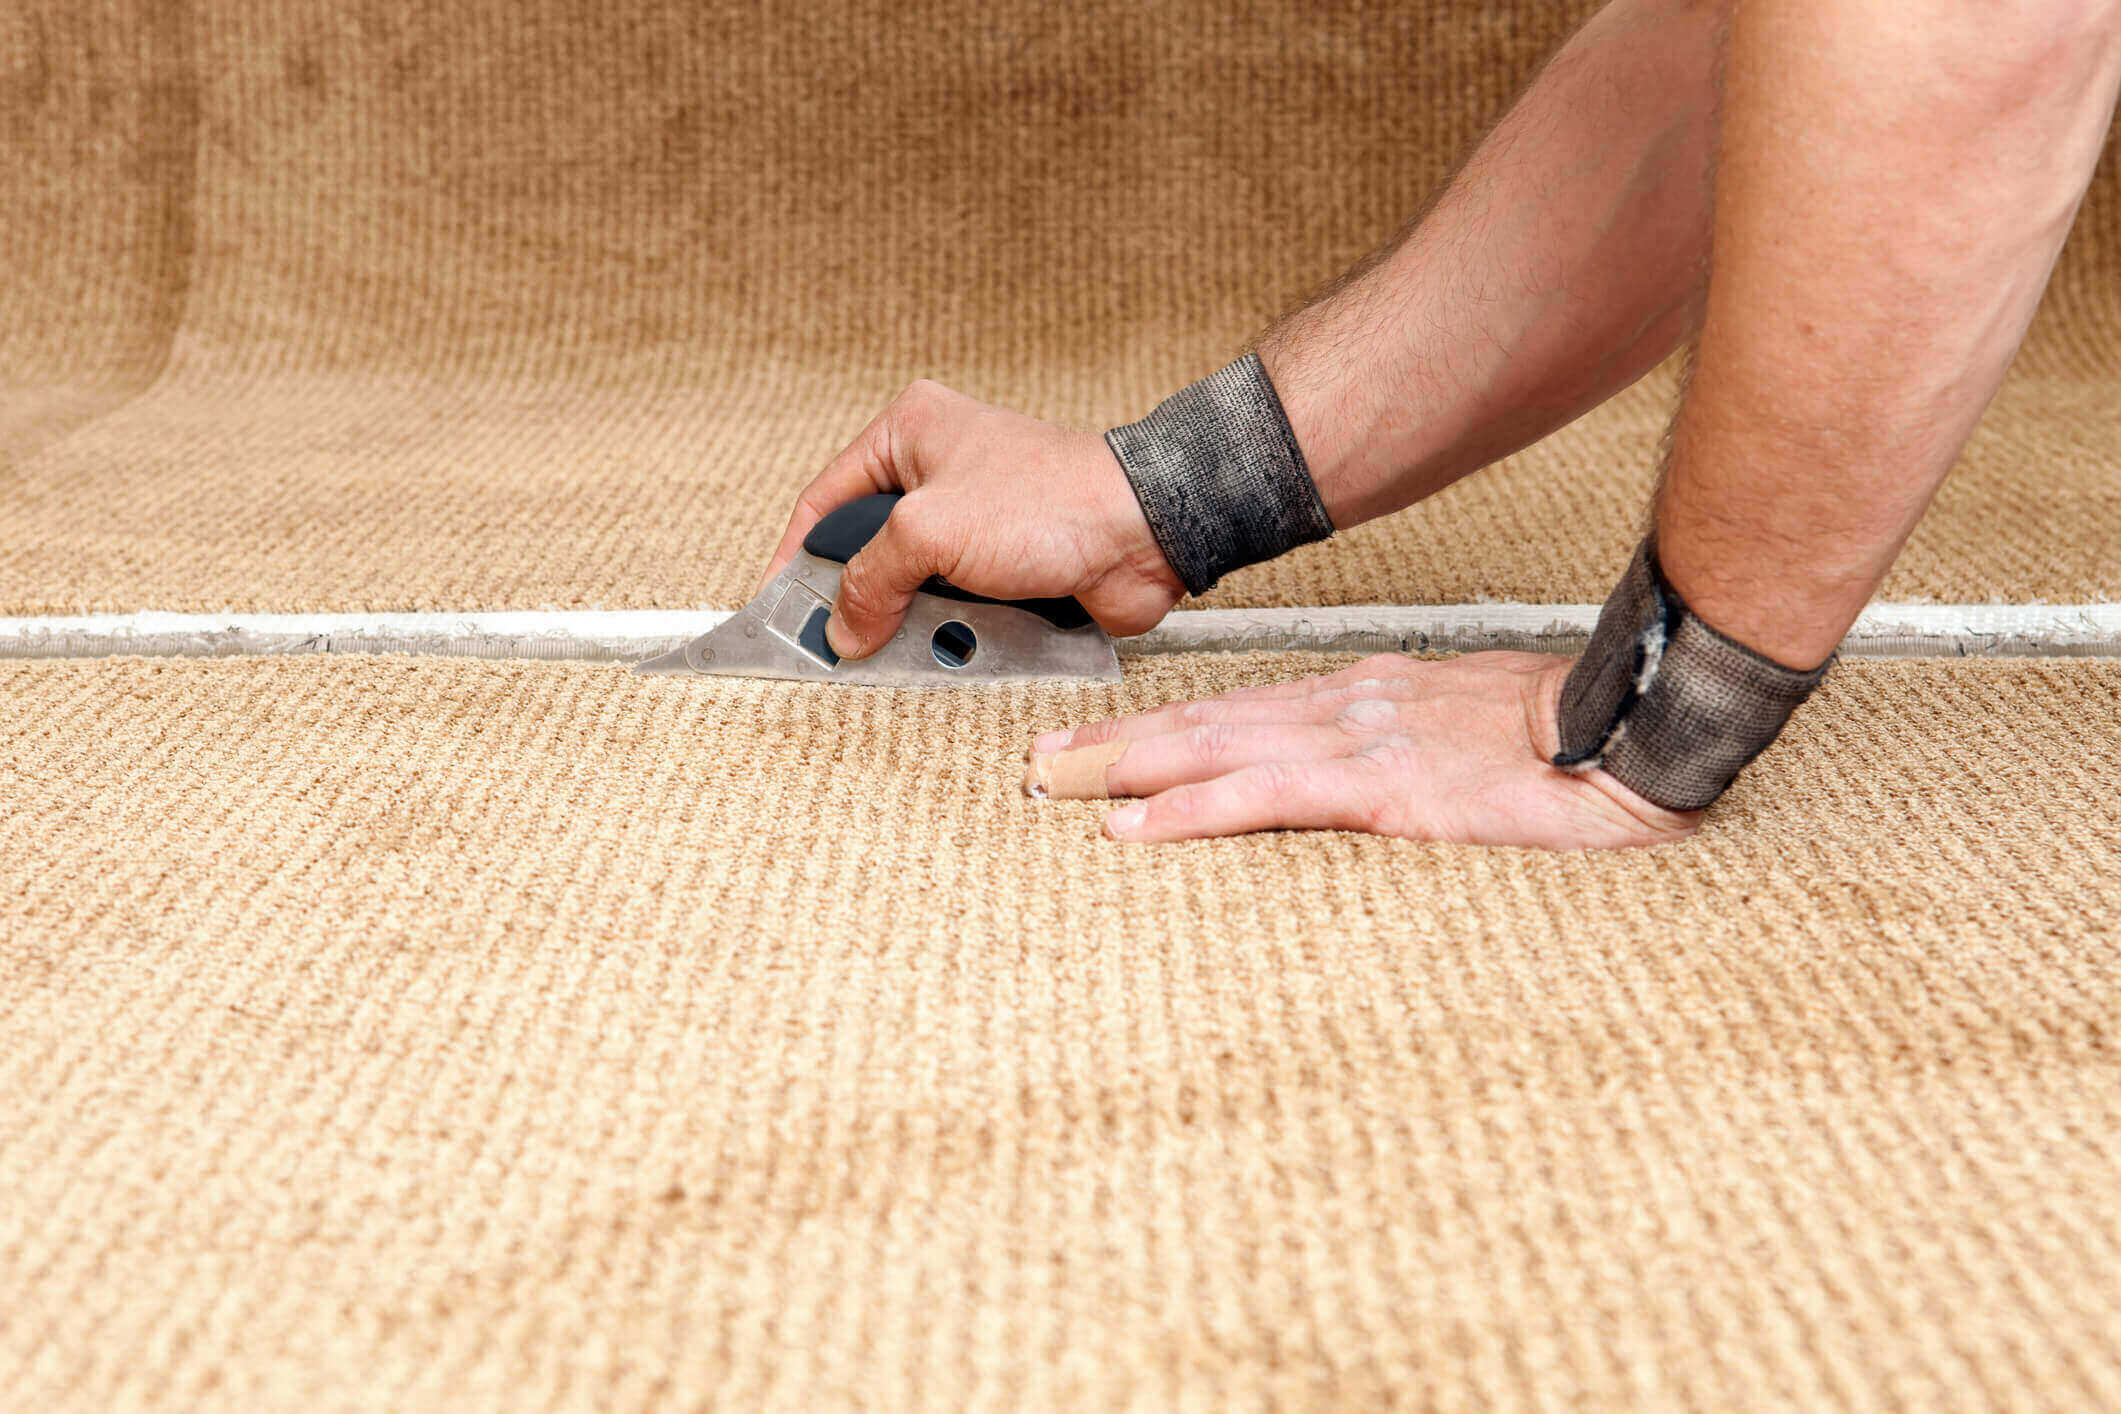 Even the highest quality carpets will eventually show signs of wear and tear. When this happens, it's important to take action to maintain the life of your carpet. Here are five ways to extend the life of your carpet, along with getting Carpet Repair Melbourne from professionals whenever necessary. 1. Regular Vacuuming The best way to keep your carpet looking good and lasting longer is by vacuuming it regularly. This removes dirt, dust and other particles that can damage the fibres over time. Be sure to use a vacuum cleaner with a beater bar or brush to get deep into the fibres and remove all the debris. You should also vacuum the edges of the carpet where it meets the floor, as dirt can build up there over time. 2. Spot Cleaning One of the simplest ways to make your carpet last longer is by spot cleaning it as needed. Accidents will happen, but if you can clean them up as soon as they occur, you'll be doing your carpet a big favour. When it comes to spotting cleaning, there are a few things to keep in mind: always blot (never scrub), use a gentle detergent and water solution, and make sure to rinse well. 3. Carpet Protection Dirt and dust are the two main culprits that can damage your carpet. Not only do they make it look unsightly over time, but they can also cause the fibres to wear down, which can lead to further damage and costly repairs. That's why it's important to use a carpet protection treatment—like our Stain Shield service—regularly. Stain Shield Forms an invisible barrier on the surface of your carpet that helps protect it from spills, dirt and dust. It also makes cleaning up spills and messes much easier! 4. Carpet Cleaning Regular carpet cleaning is essential to keeping your flooring looking its best. Not only will it remove dirt, dust and stains, but it will also help to prevent future damage. Many people think that they need to hire a professional to clean their carpets, but that's not always the case. There are a number of great DIY carpet cleaning tips out there that can help you get the job done quickly and easily. For deep cleaning, however, hiring a professional is always the best option. They have the experience and equipment necessary to get your carpets looking like new again. 5. Hiring a Professional One of the best ways to protect your carpet and ensure its longevity is to hire a professional carpet repair service. Professionals have the experience, tools and techniques to not only fix areas that have been damaged but also to prevent future damage from occurring. They can also give you valuable advice on how to best care for your carpet in order to keep it looking its best for as long as possible. So if you're worried about your carpet's longevity, be sure to get in touch with a professional carpet repair service today! To sum it all up, A little bit of maintenance can go a long way in preserving the life of your carpet. By following these simple tips, you can help keep your carpet looking good as new for years to come. If you do find that your carpet needs more extensive care, don't hesitate to reach out to a professional carpet repair service for assistance.